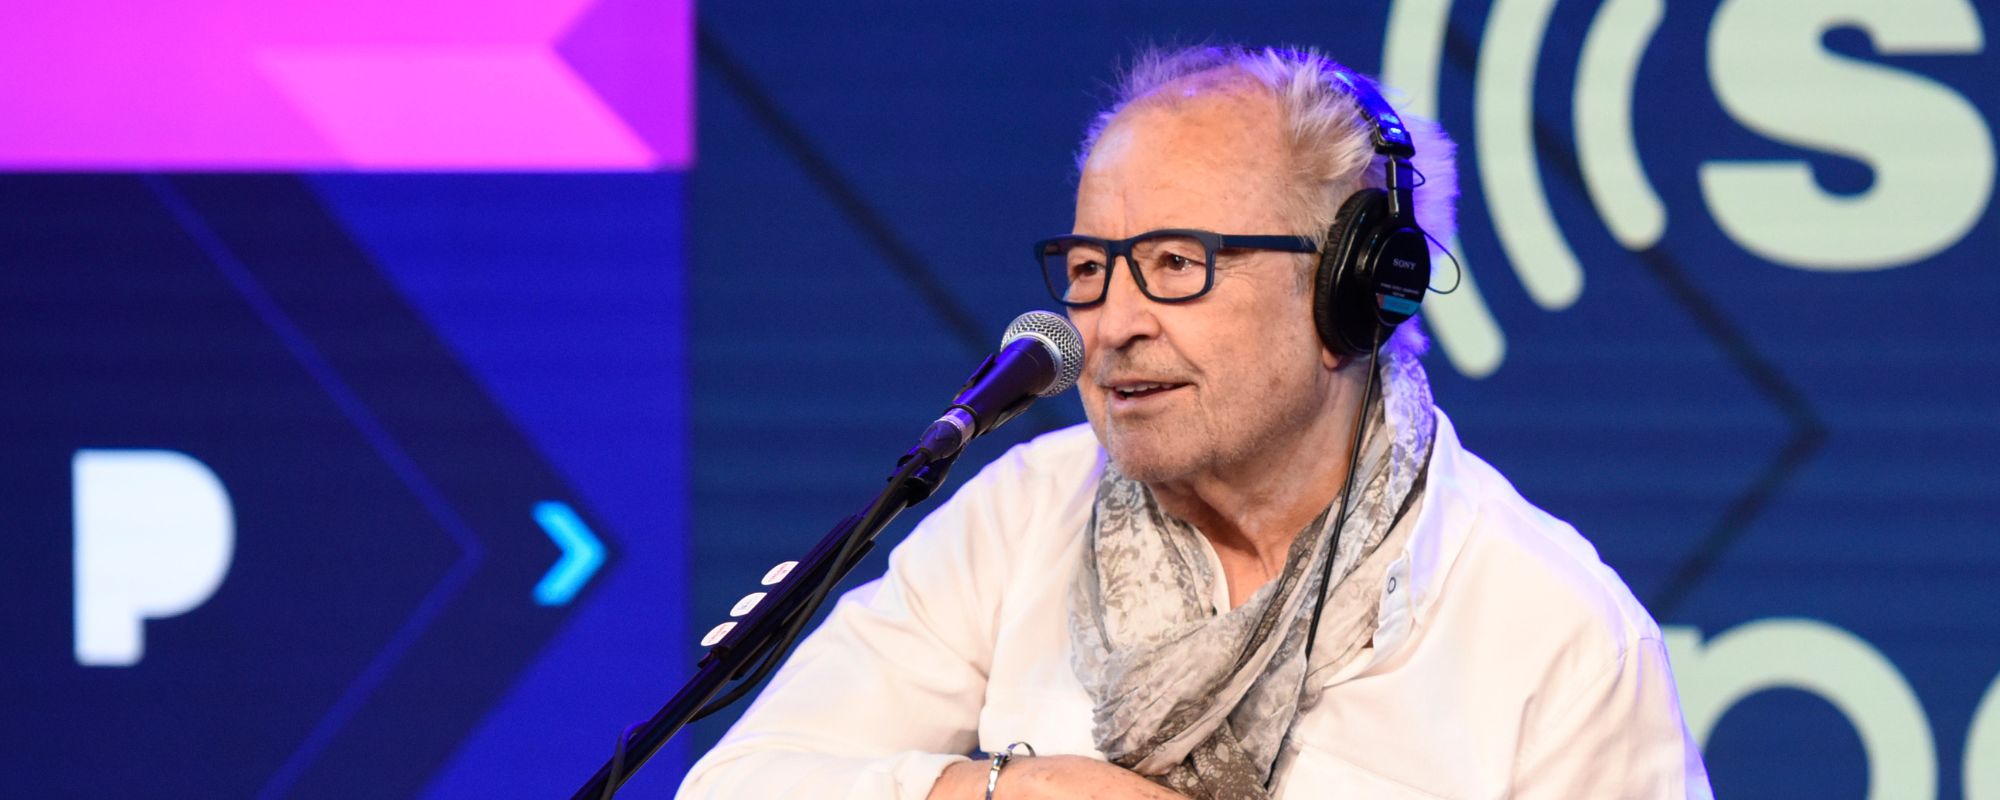 Foreigner’s Mick Jones Discloses Parkinson’s Disease Diagnosis, Opens Up On “Daily Struggle”